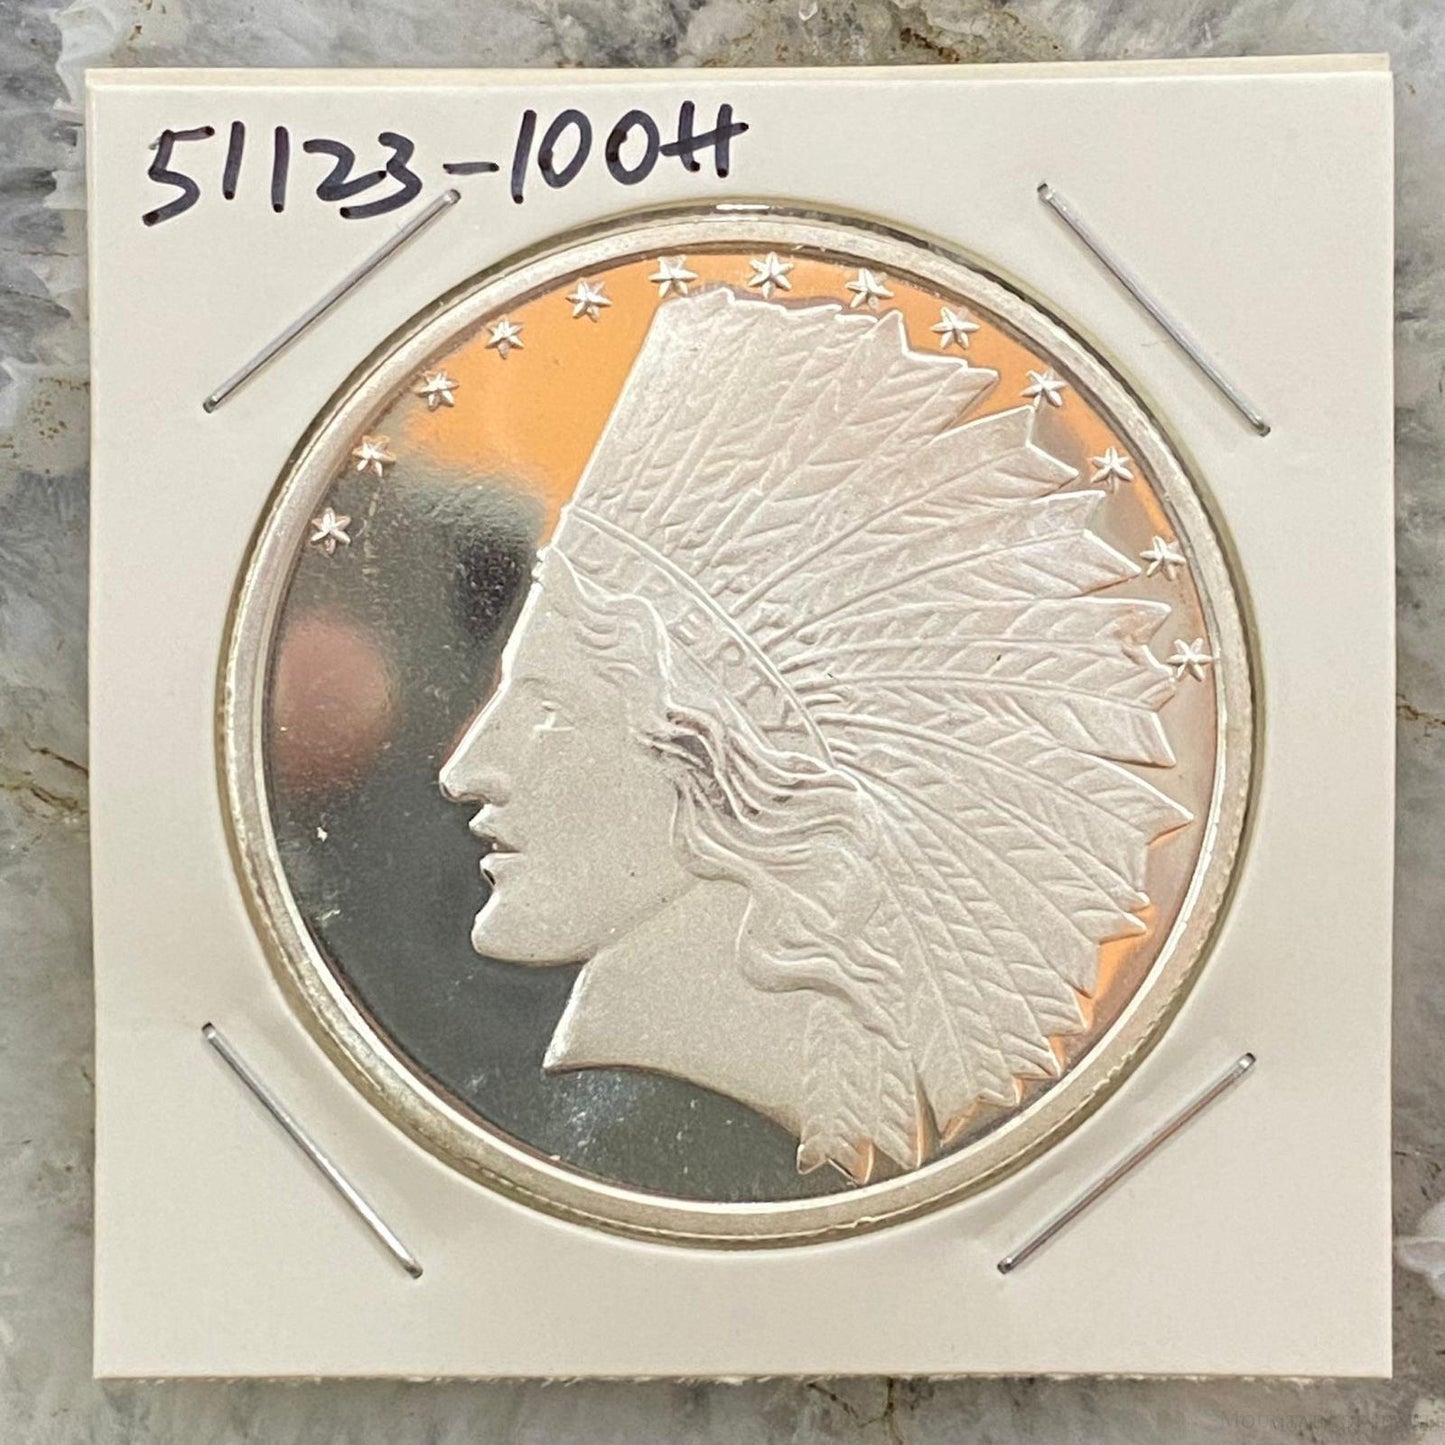 1.0 Ozt US Indian Head Design .999 Fine Silver From SilverTowne BU #51123-10OH